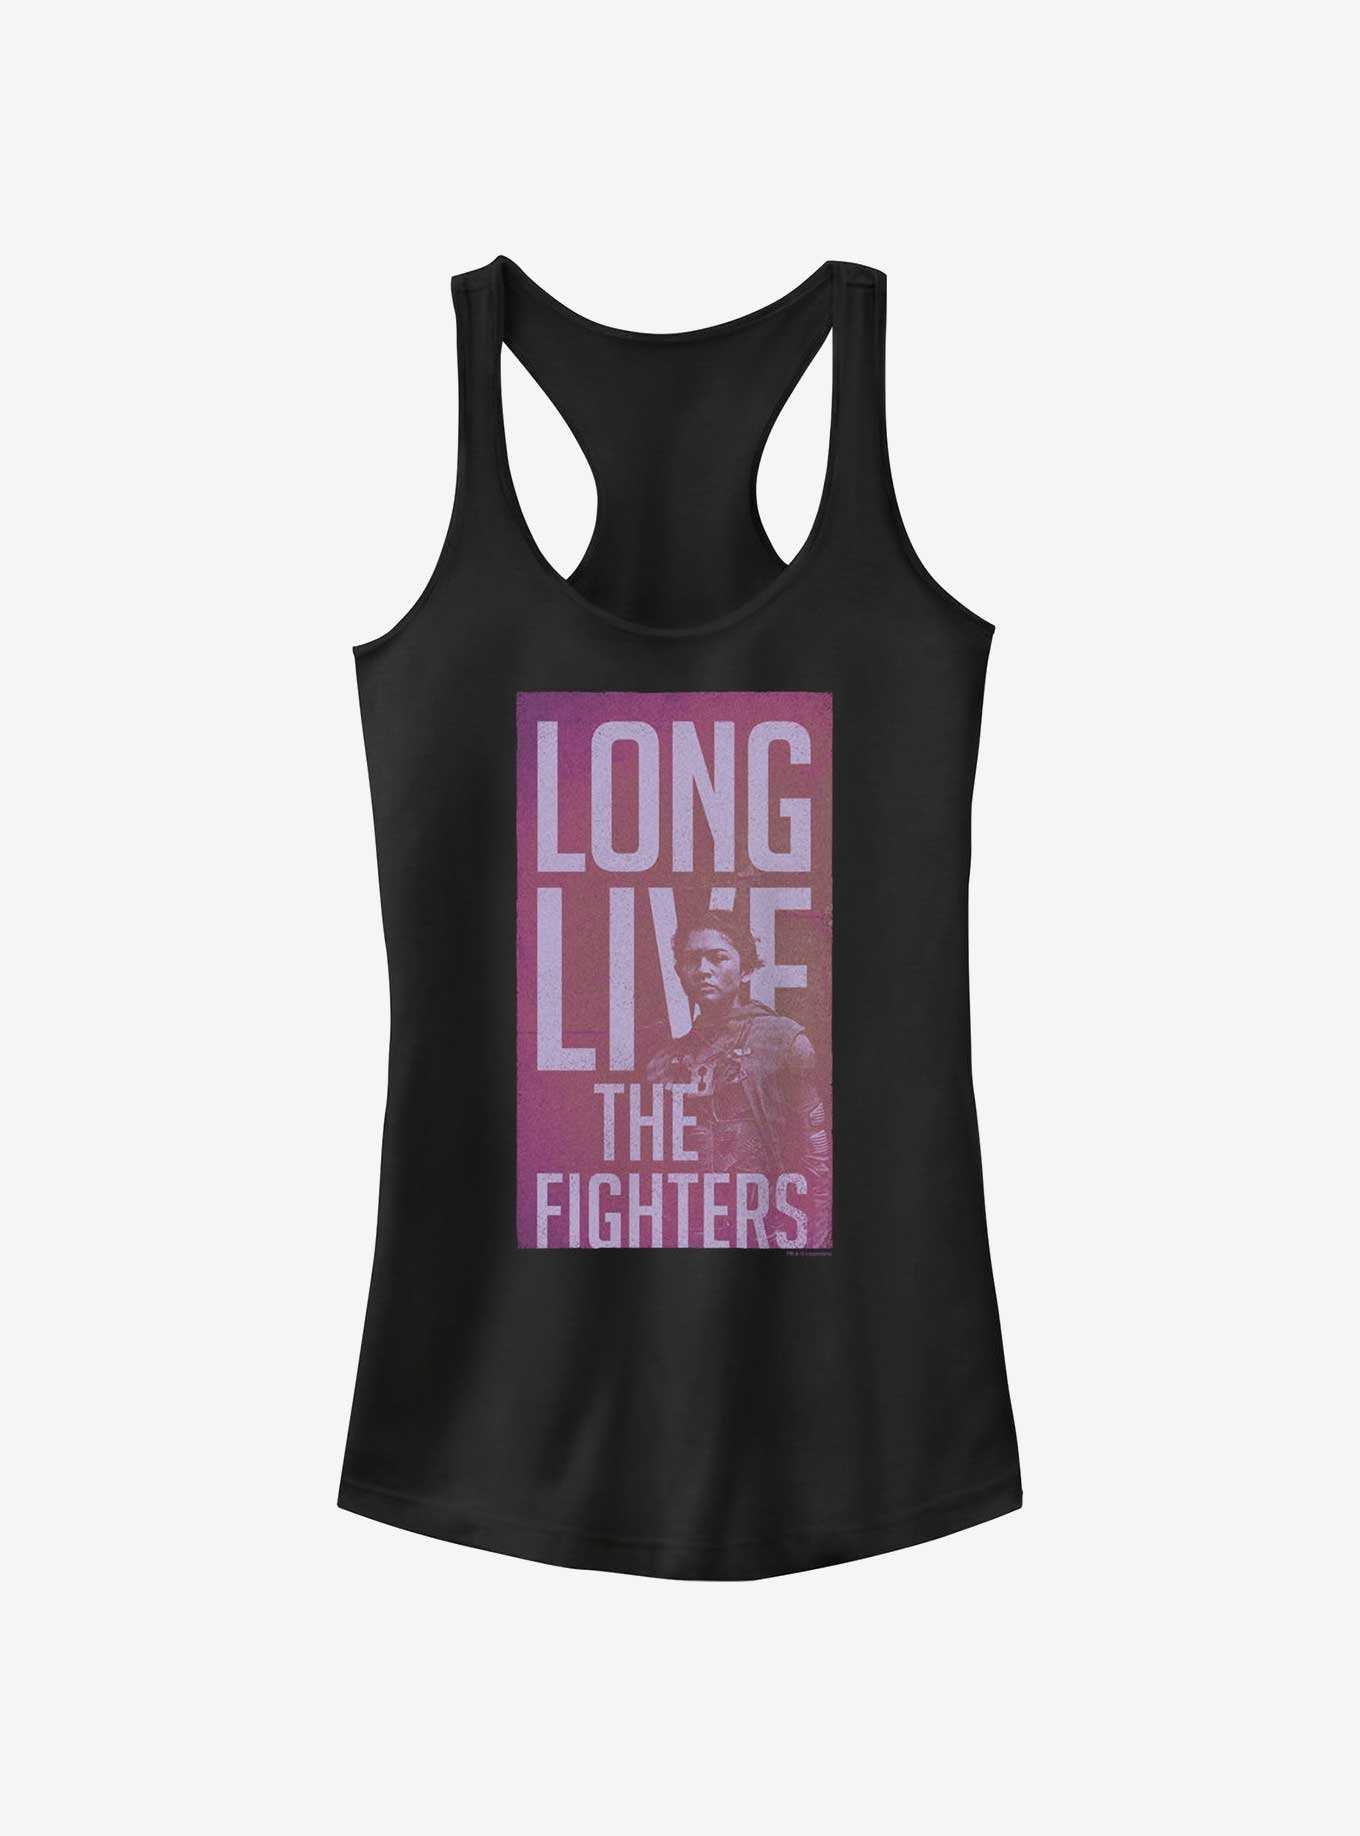 Dune: Part Two Long Live The Fighters Chani Girls Tank, , hi-res